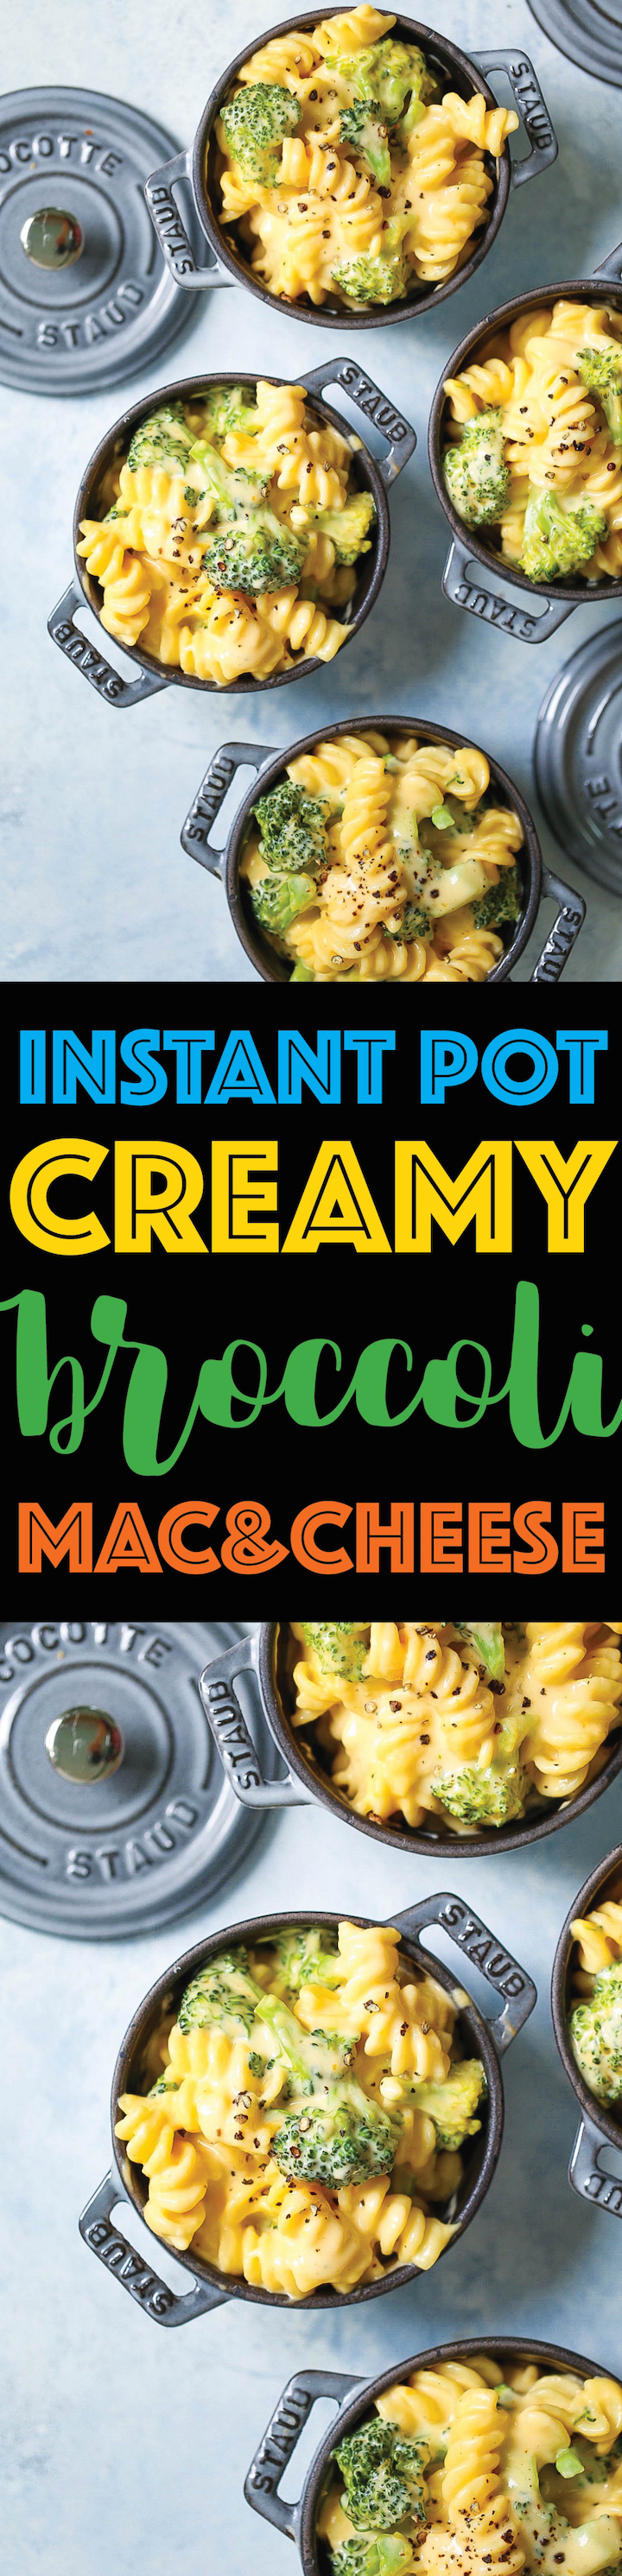 Instant Pot Creamy Broccoli Mac and Cheese - Making mac and cheese in the Instant Pot is definitely the way to go! It's unbelievably easy, it's made in one single pot (hello, easiest clean up ever), and the mac and cheese comes out amazingly creamy! You can't beat that!